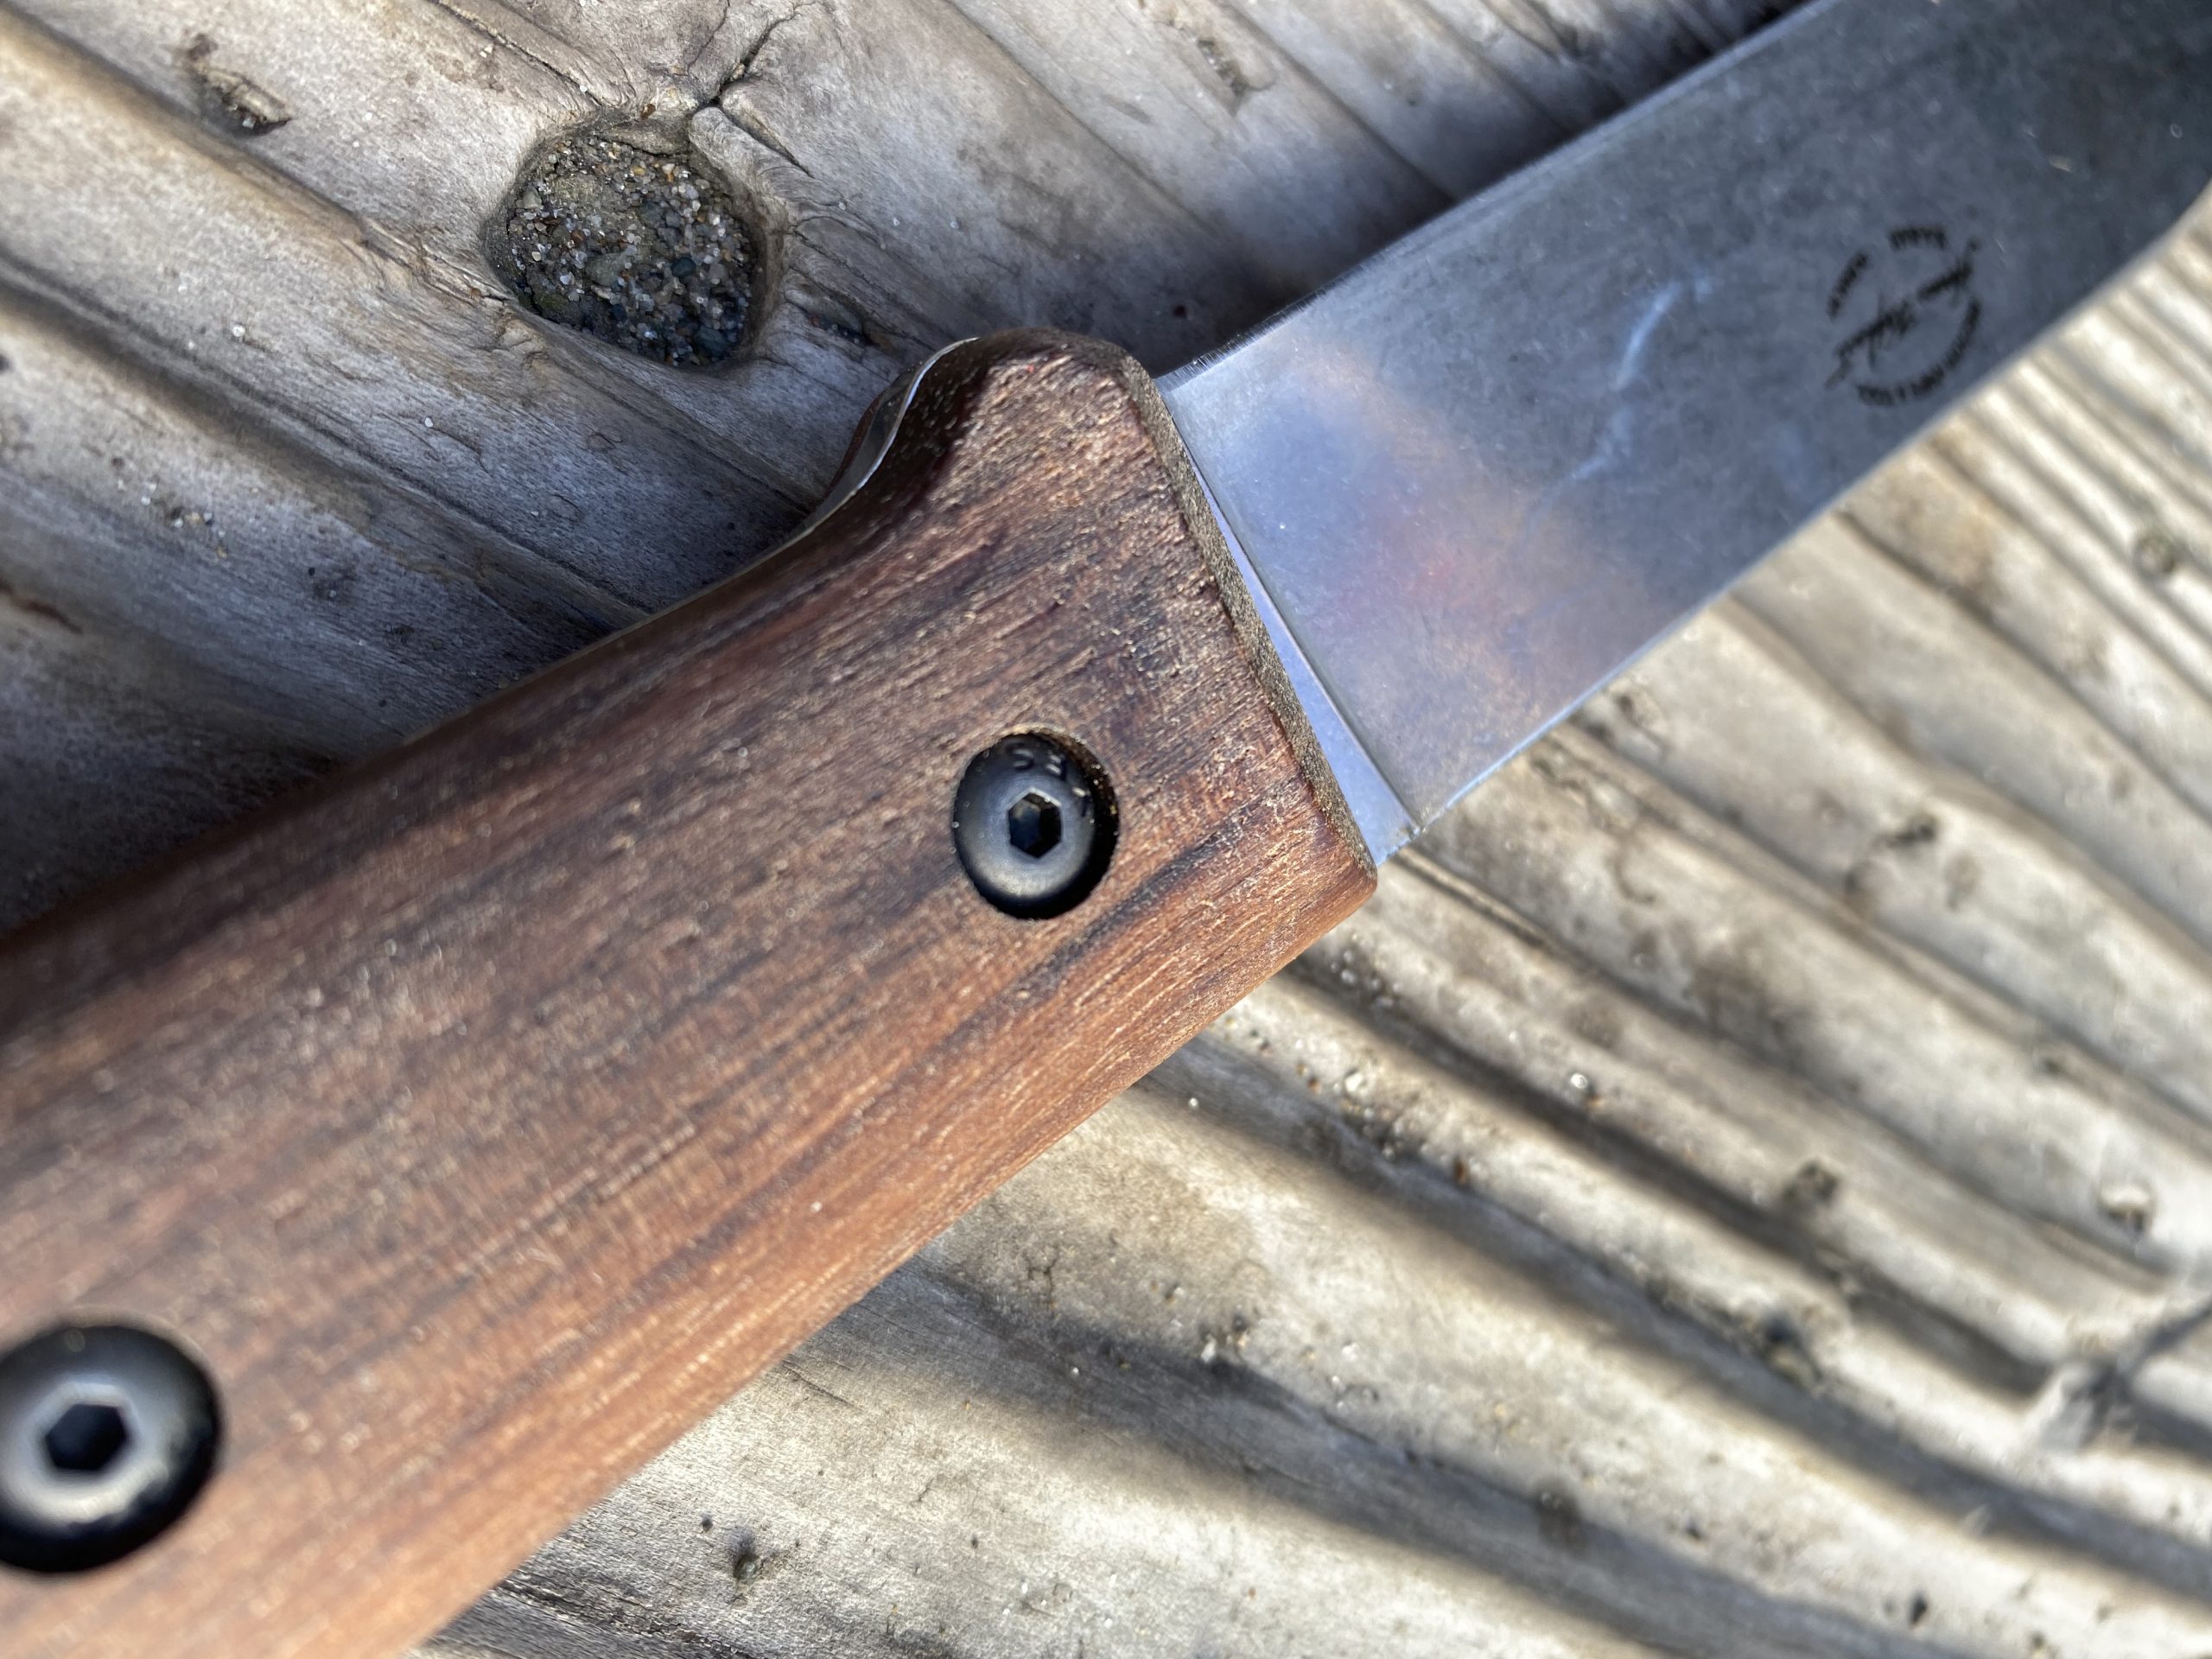 The blade stock on the BK62 is thin, and the flat grind goes all the way to the spine. 